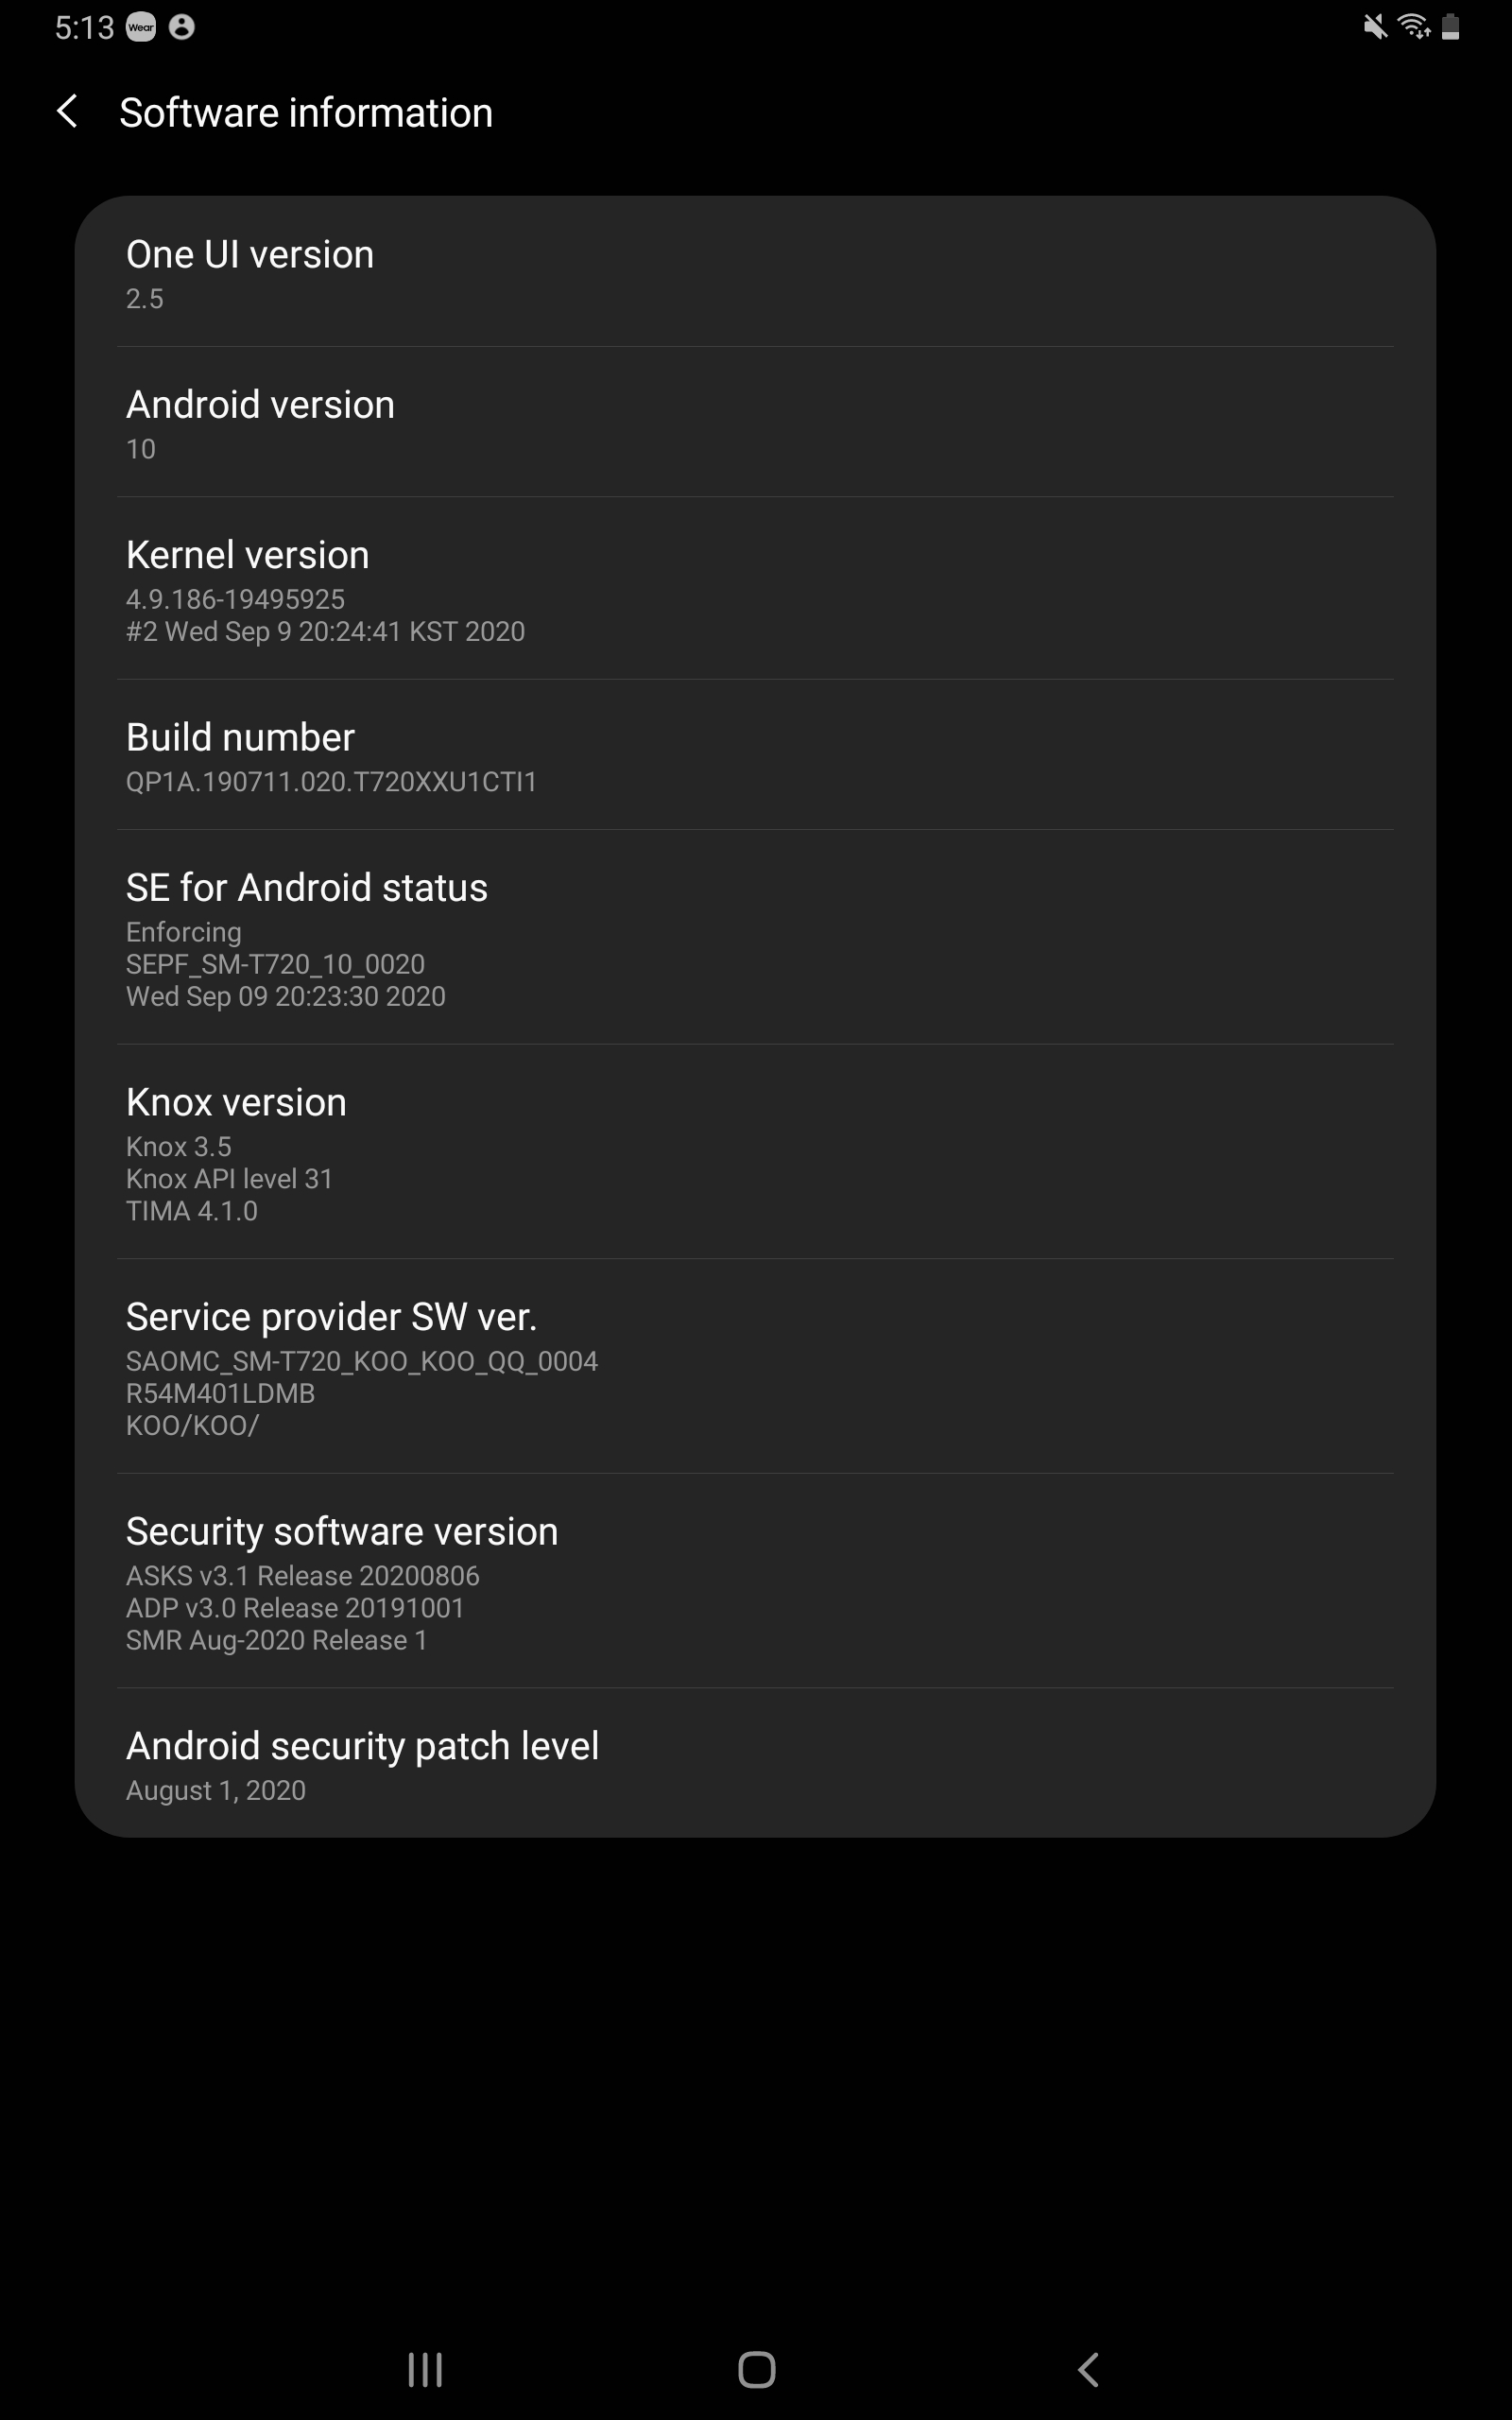 [US too] Samsung Galaxy Tab S5e One UI 2.5 update is now rolling out